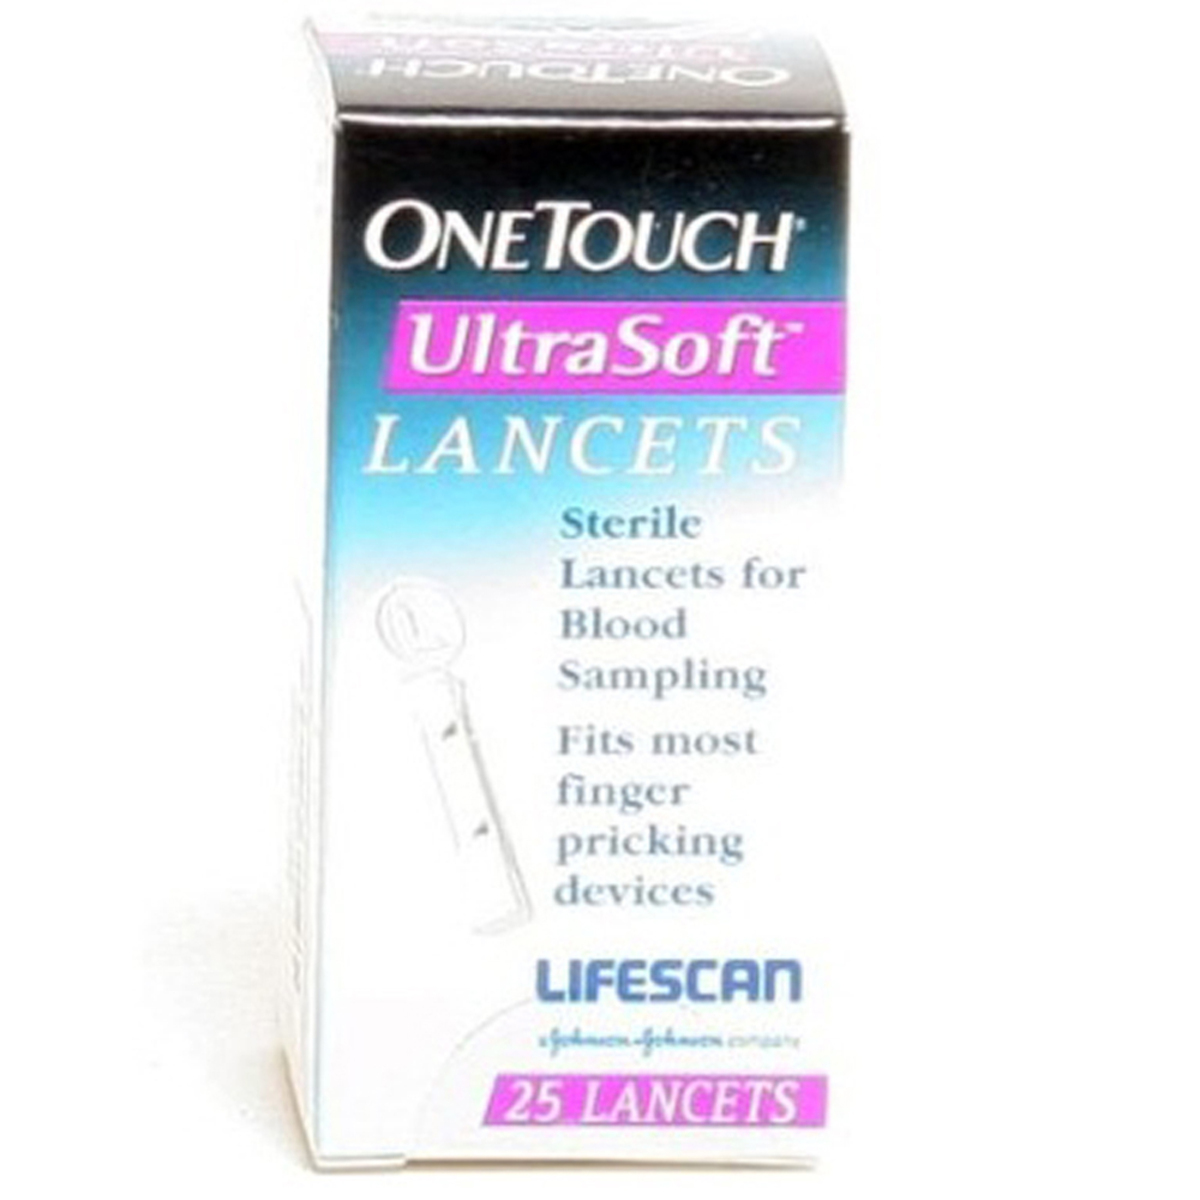 One Touch UltraSoft Lancets 25's